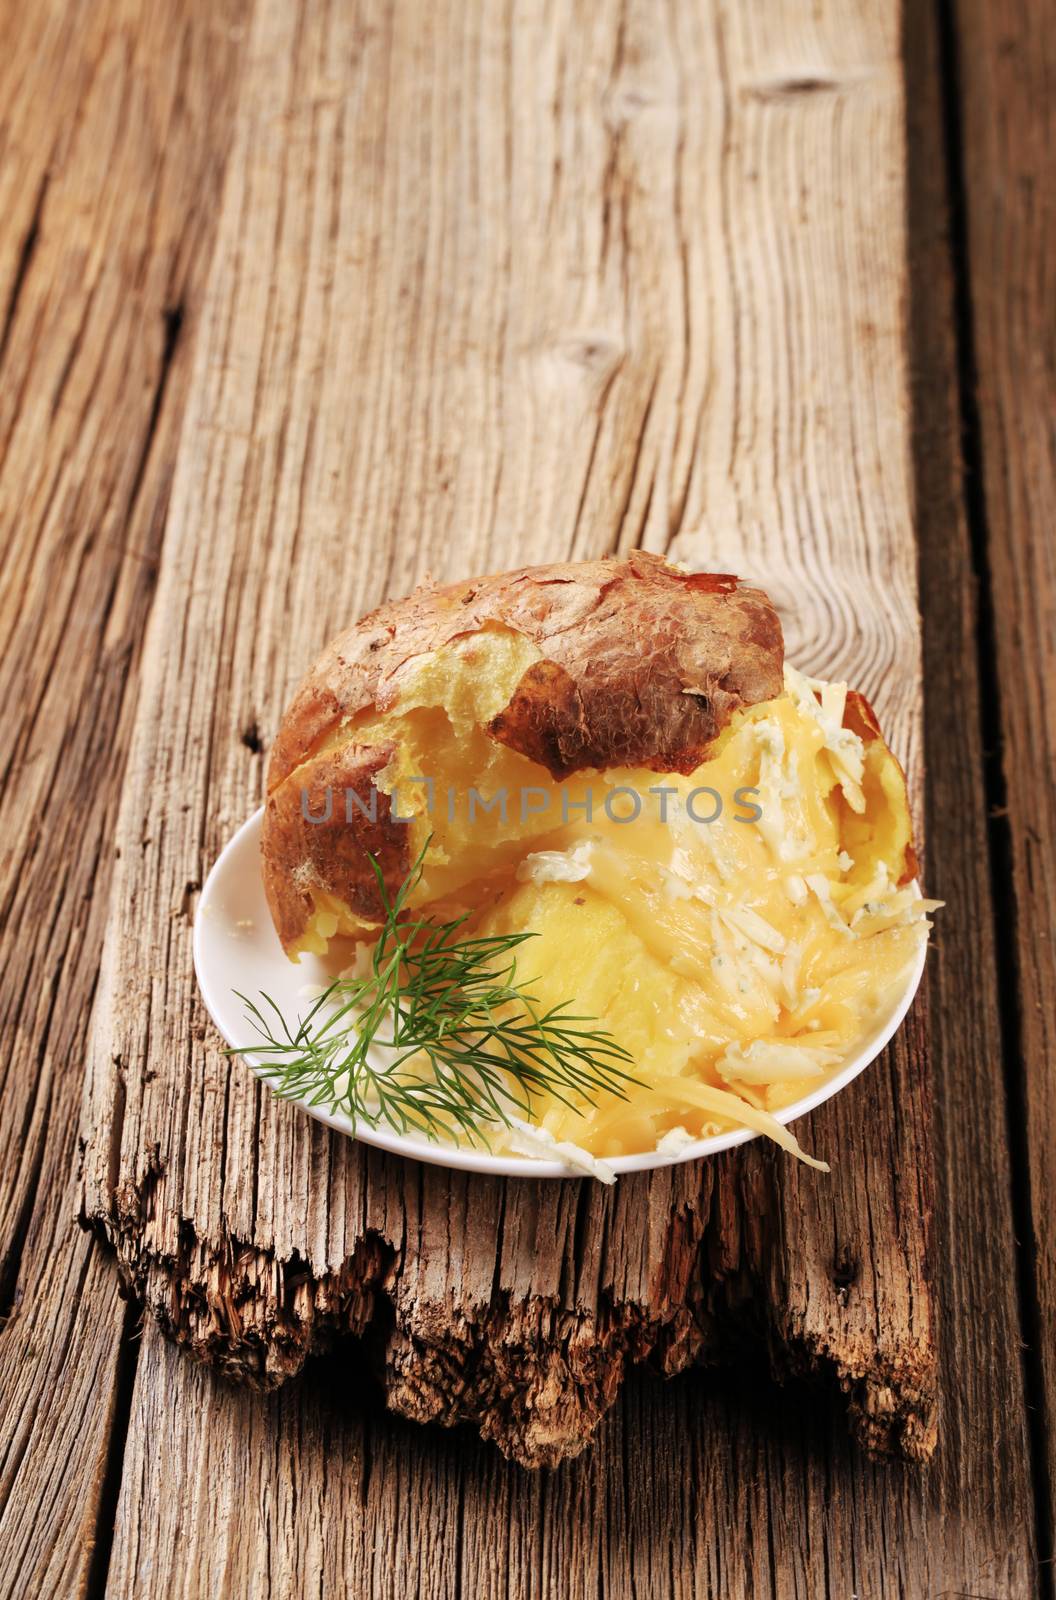 Baked potato with two kinds of cheese